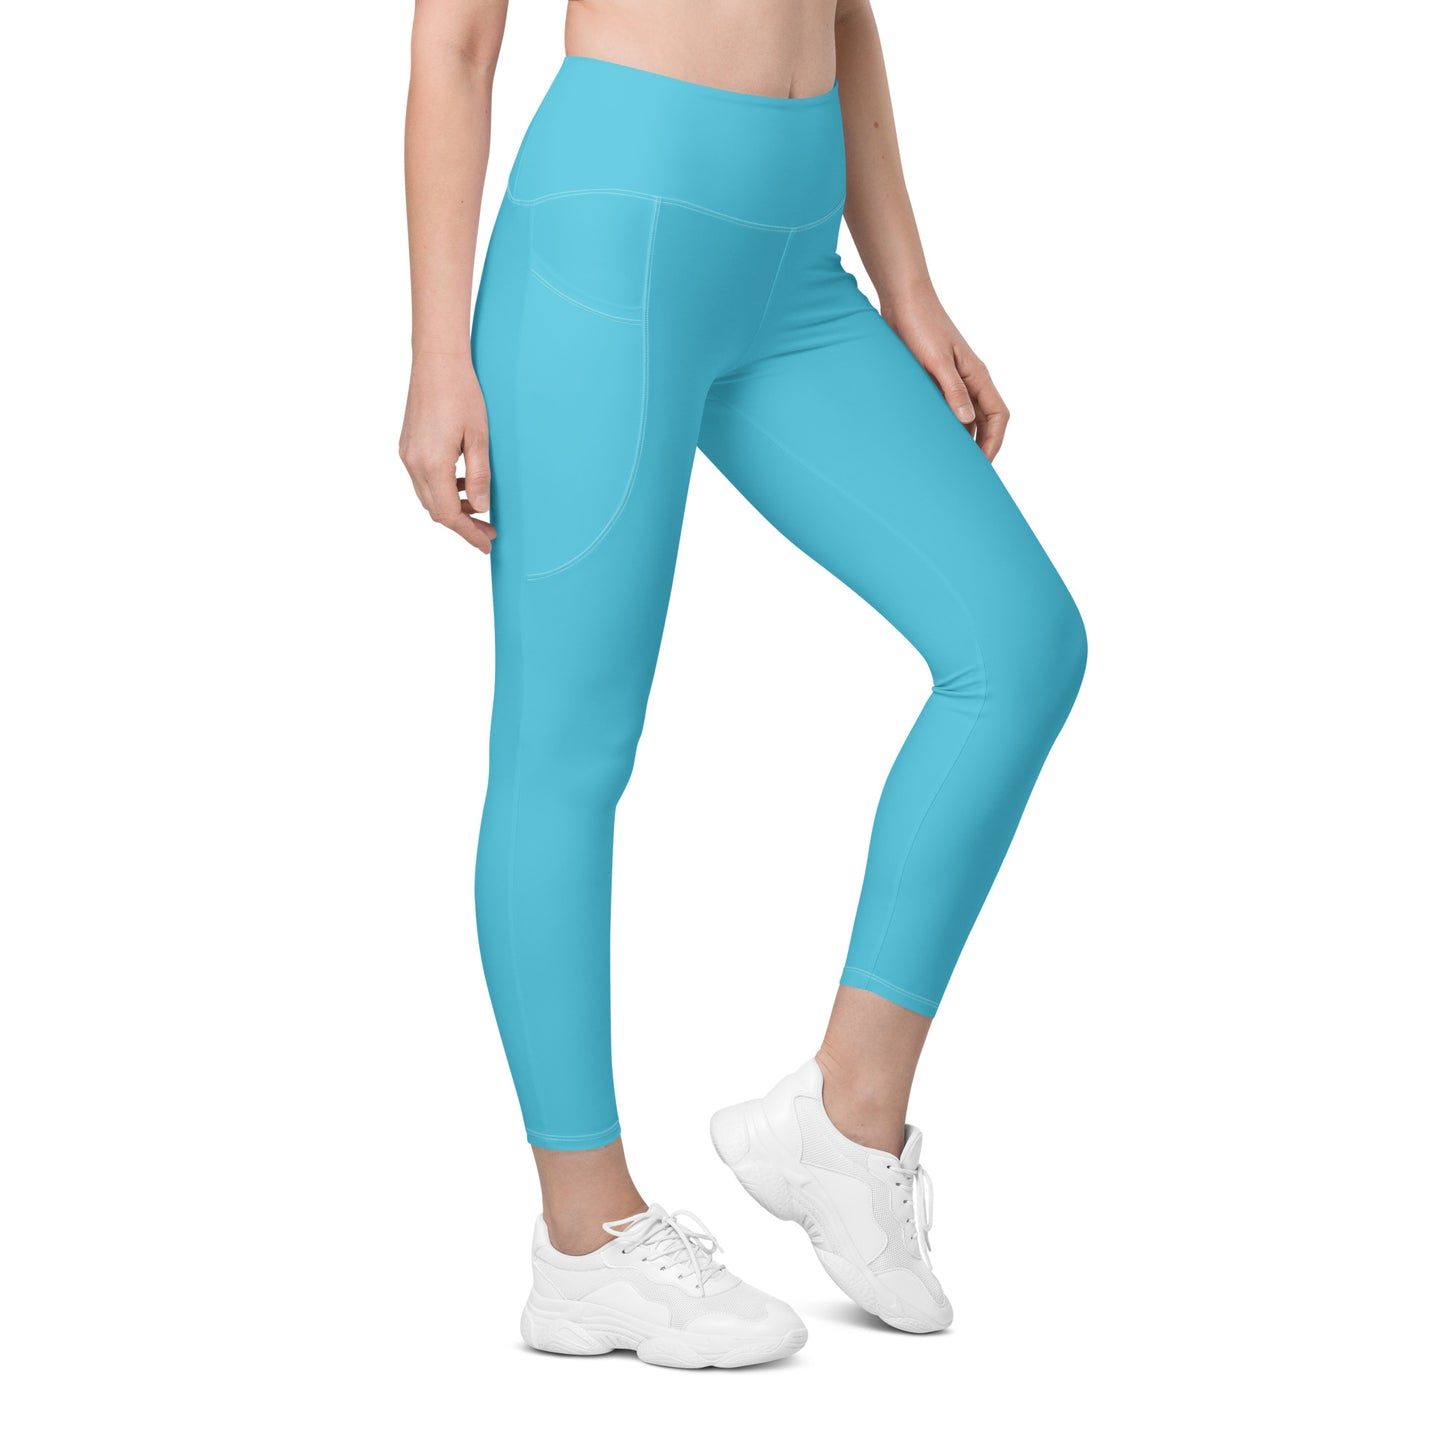 Fiori Solid Color High Waist 7/8 Recycled Yoga Leggings / Yoga Pants with Pockets